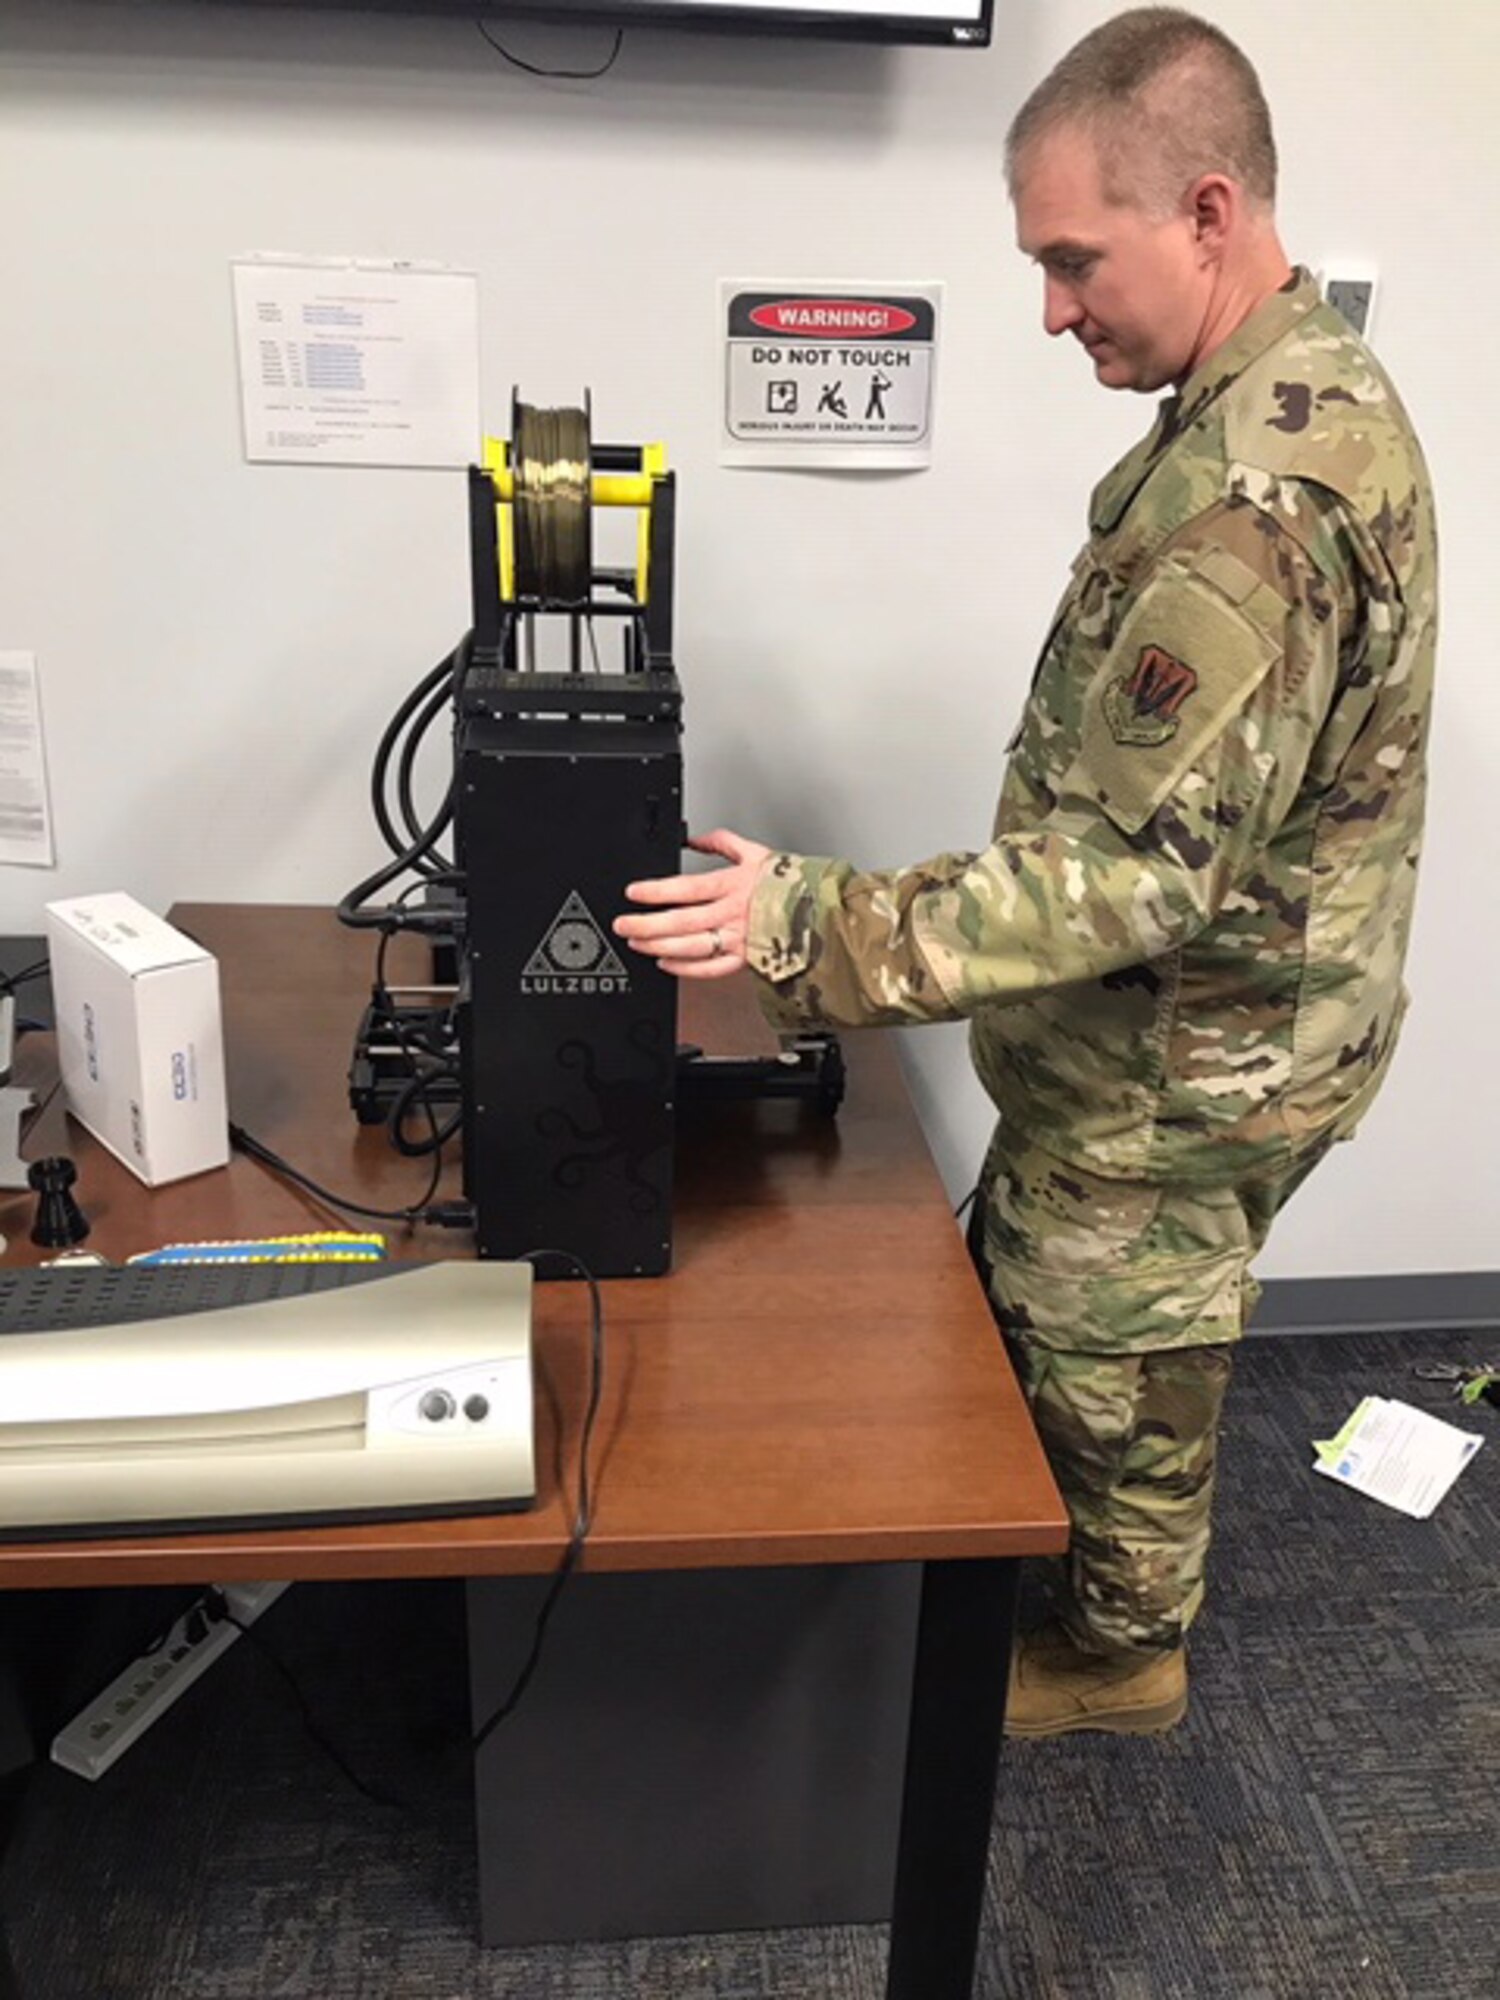 Tech. Sgt. Ryan Hawk, 552nd Maintenance Group, works with a 3D printer in the Continuous Improvement Office. Utilizing a 3D printer, the office prototyped approximately 40 face masks and face shields to support the 72nd Security Forces during the COVID-19 pandemic.